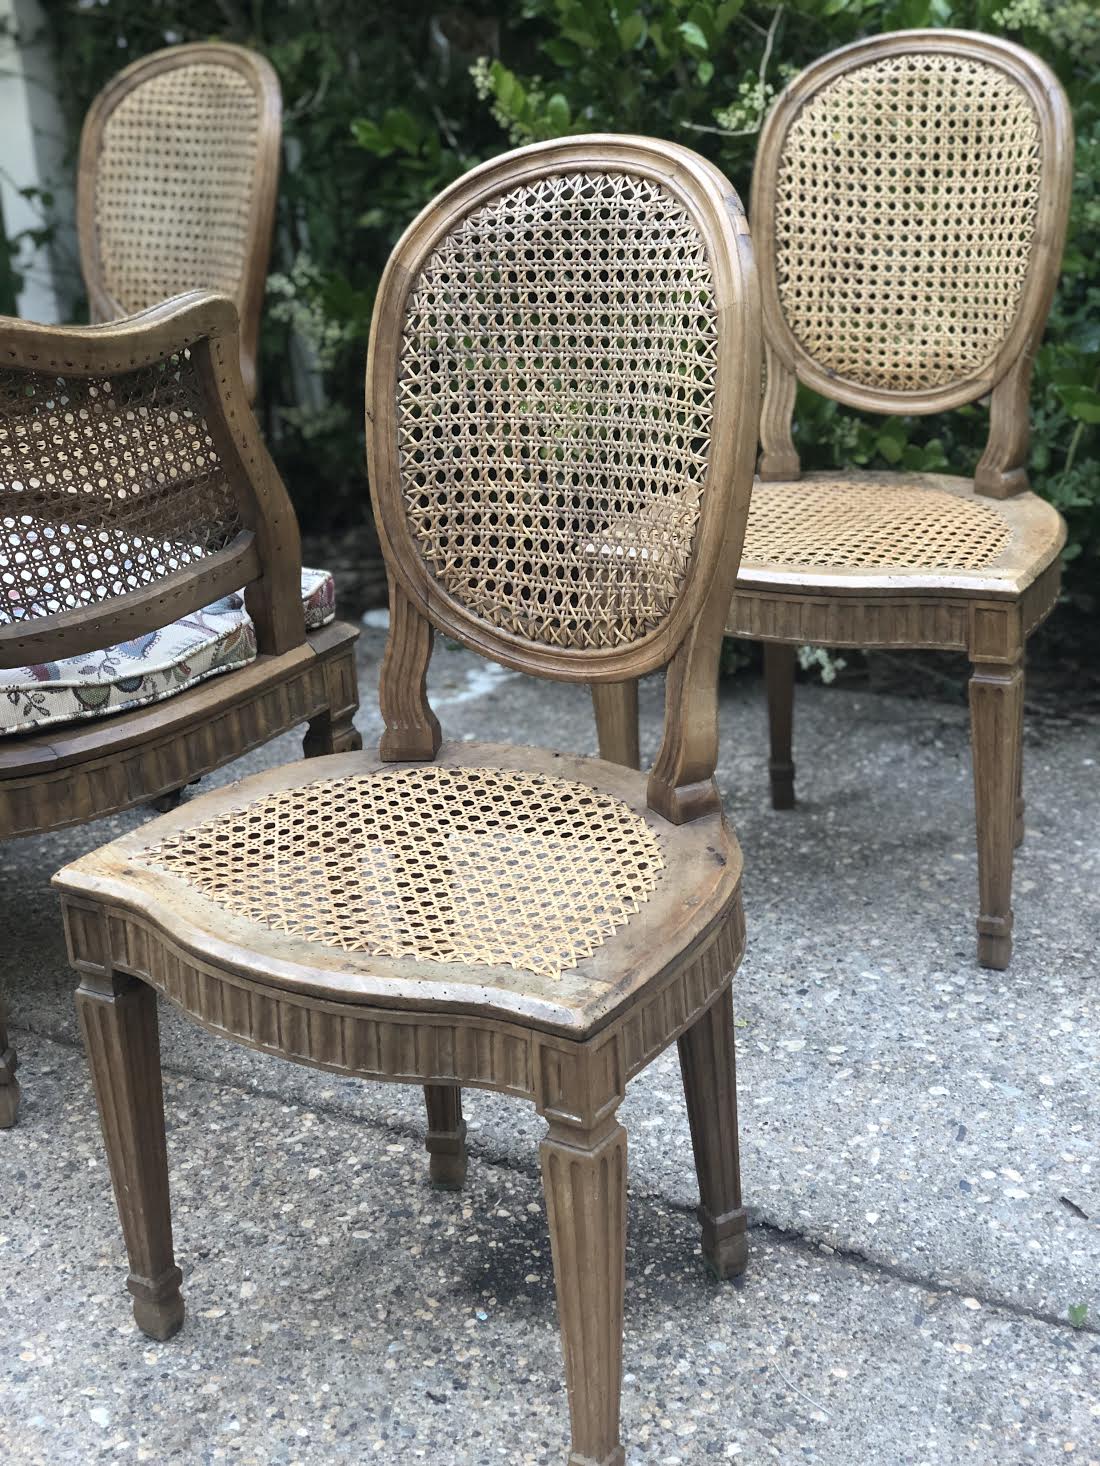 Cane Chairs Craigslist Shopping Tips French Country Cottage